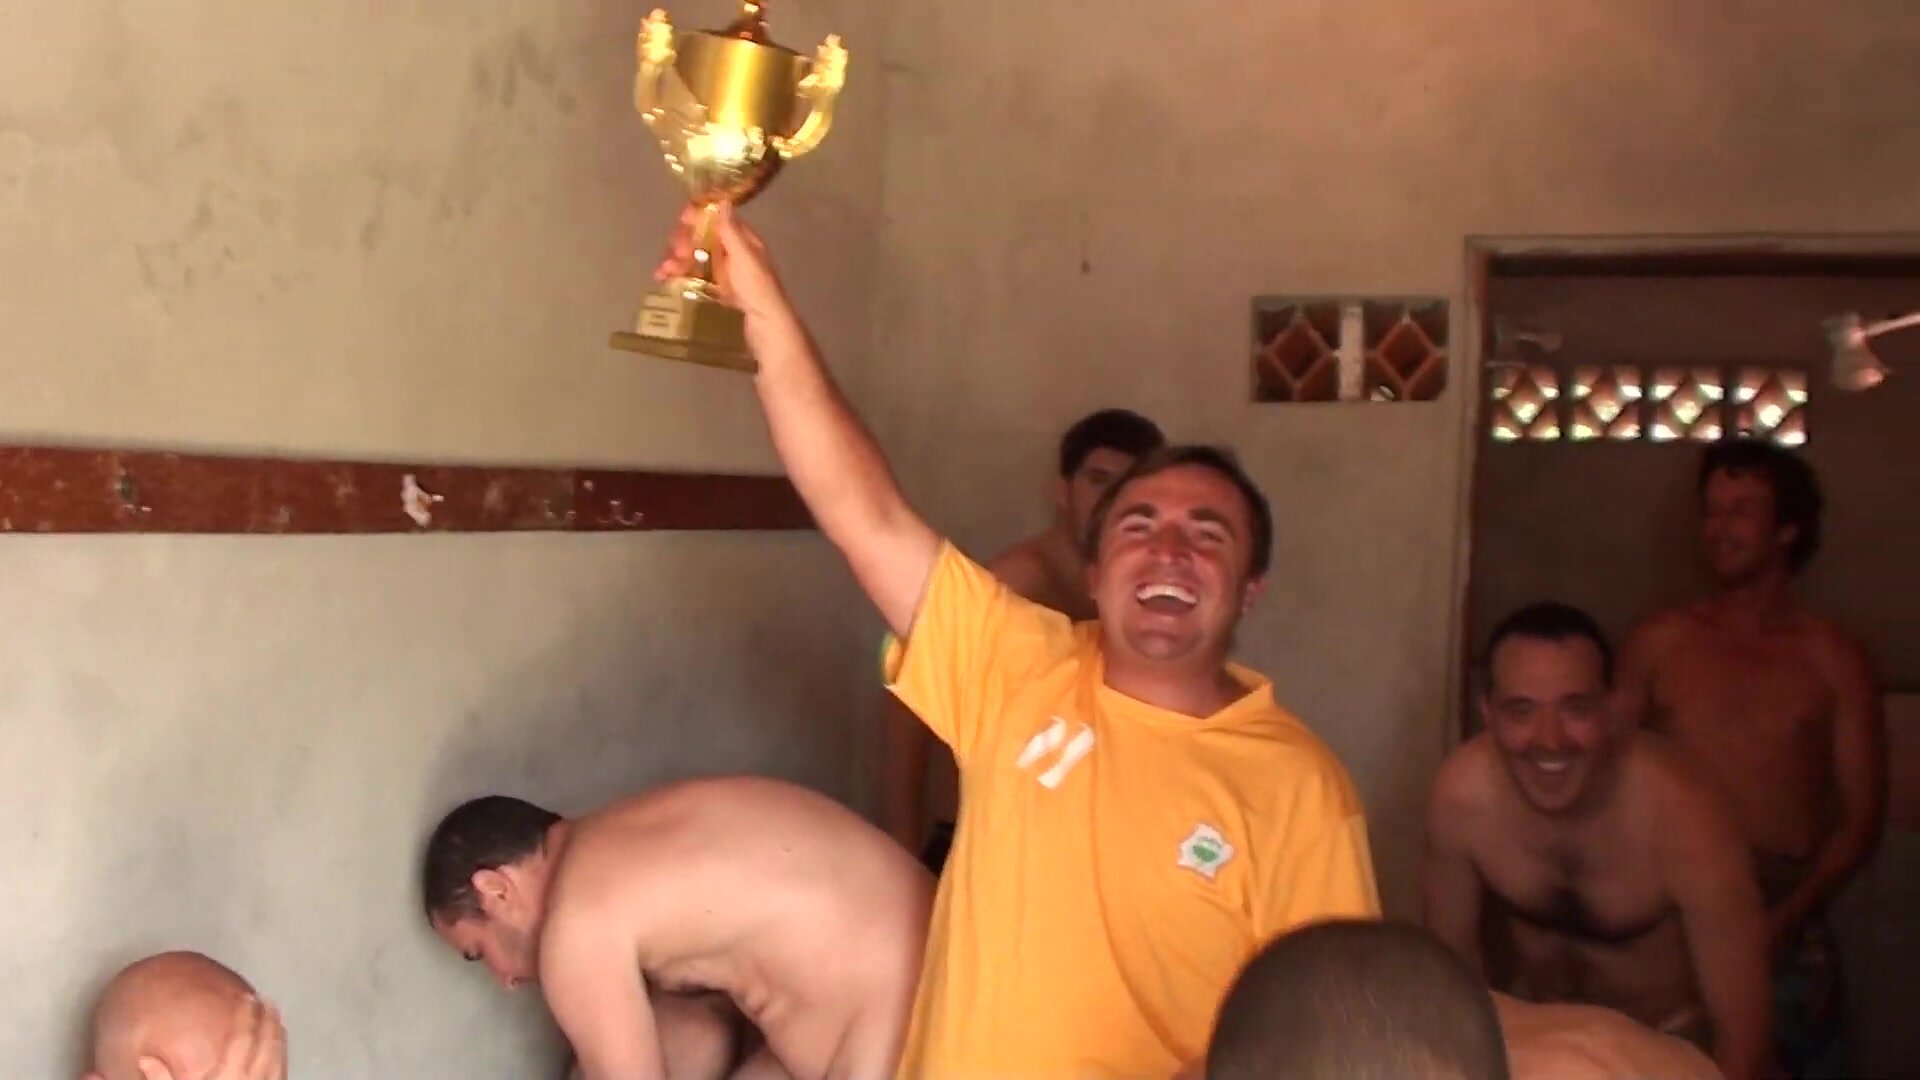 Amateur team players celebrate (naked)